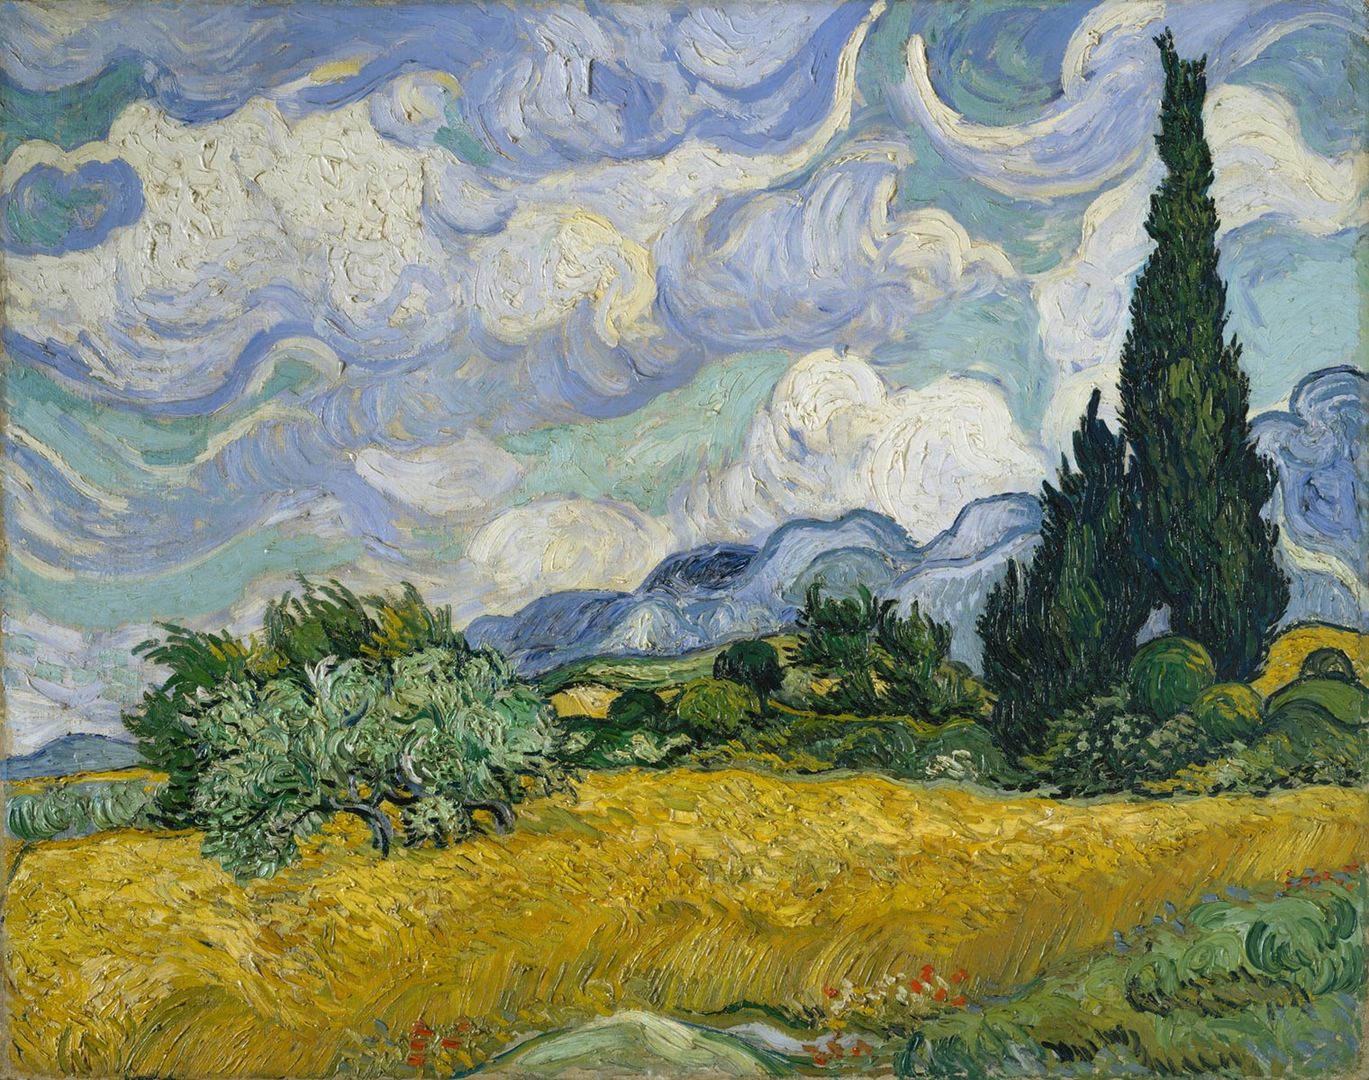 Van Gogh, Wheat Field with Cypresses